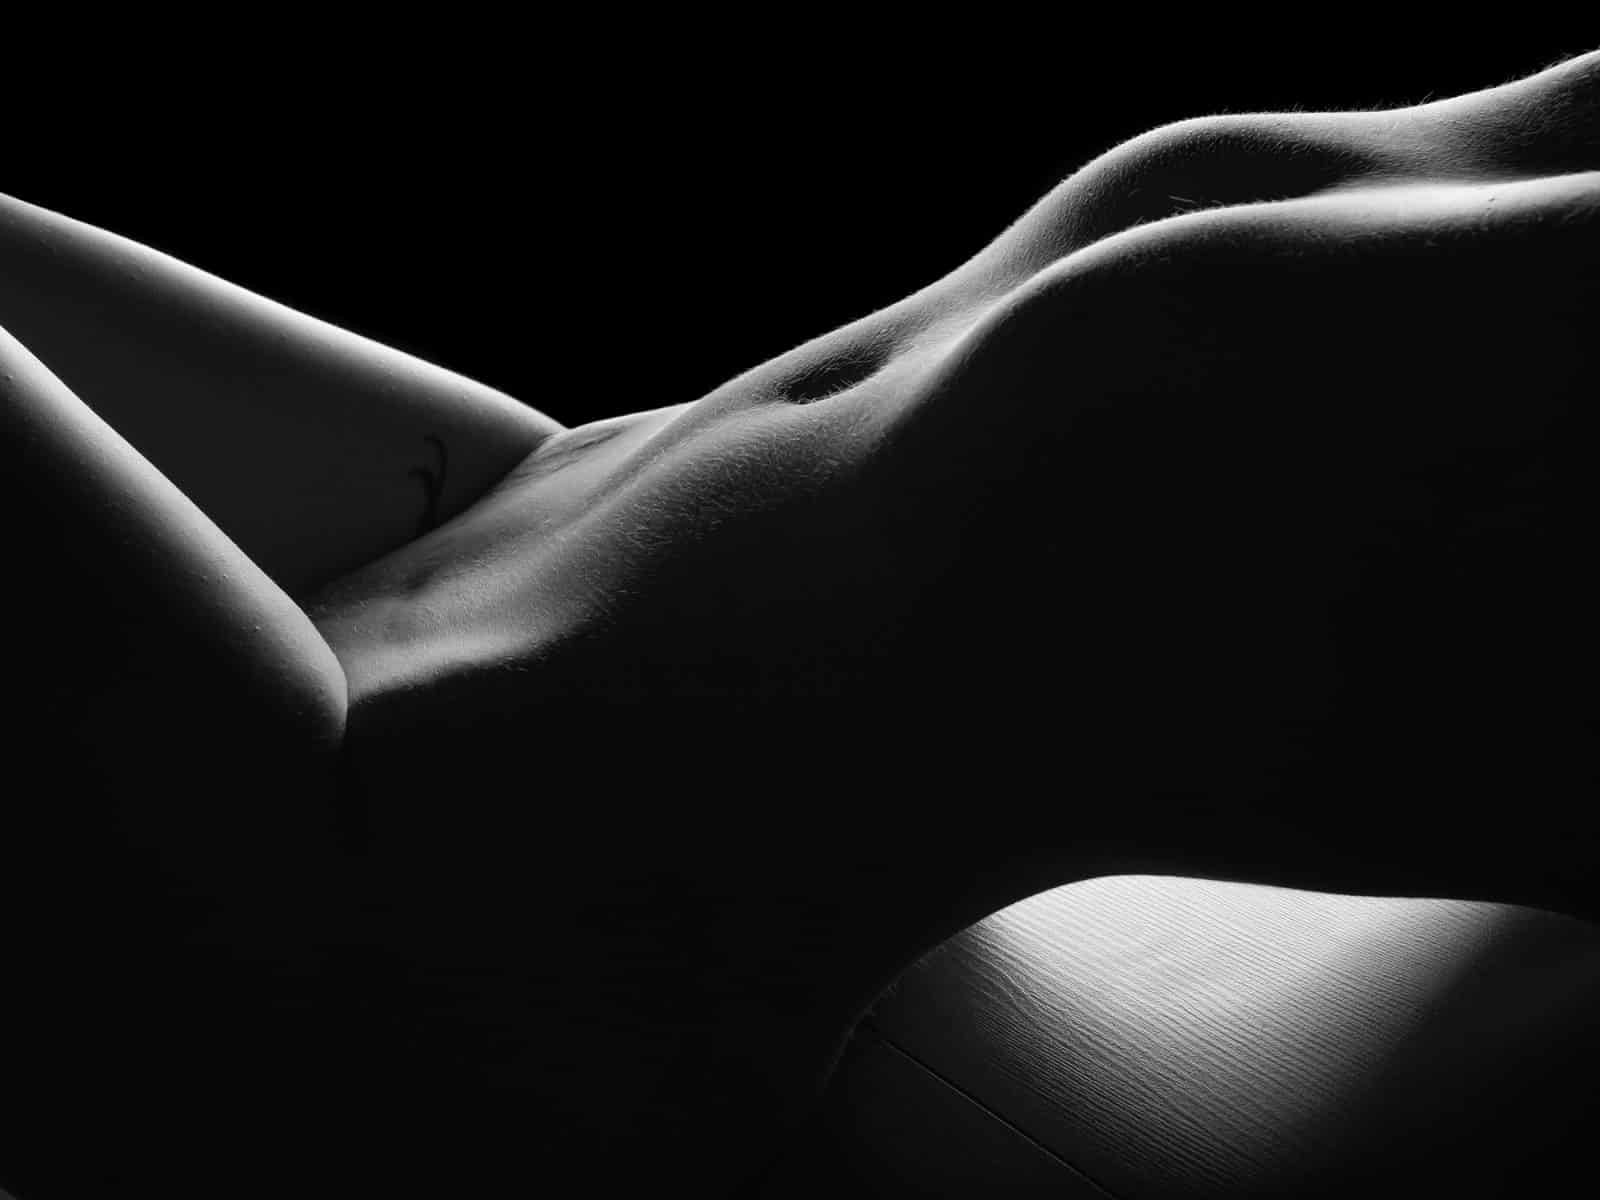 Nude portrait captured during a bodyscape photoshoot